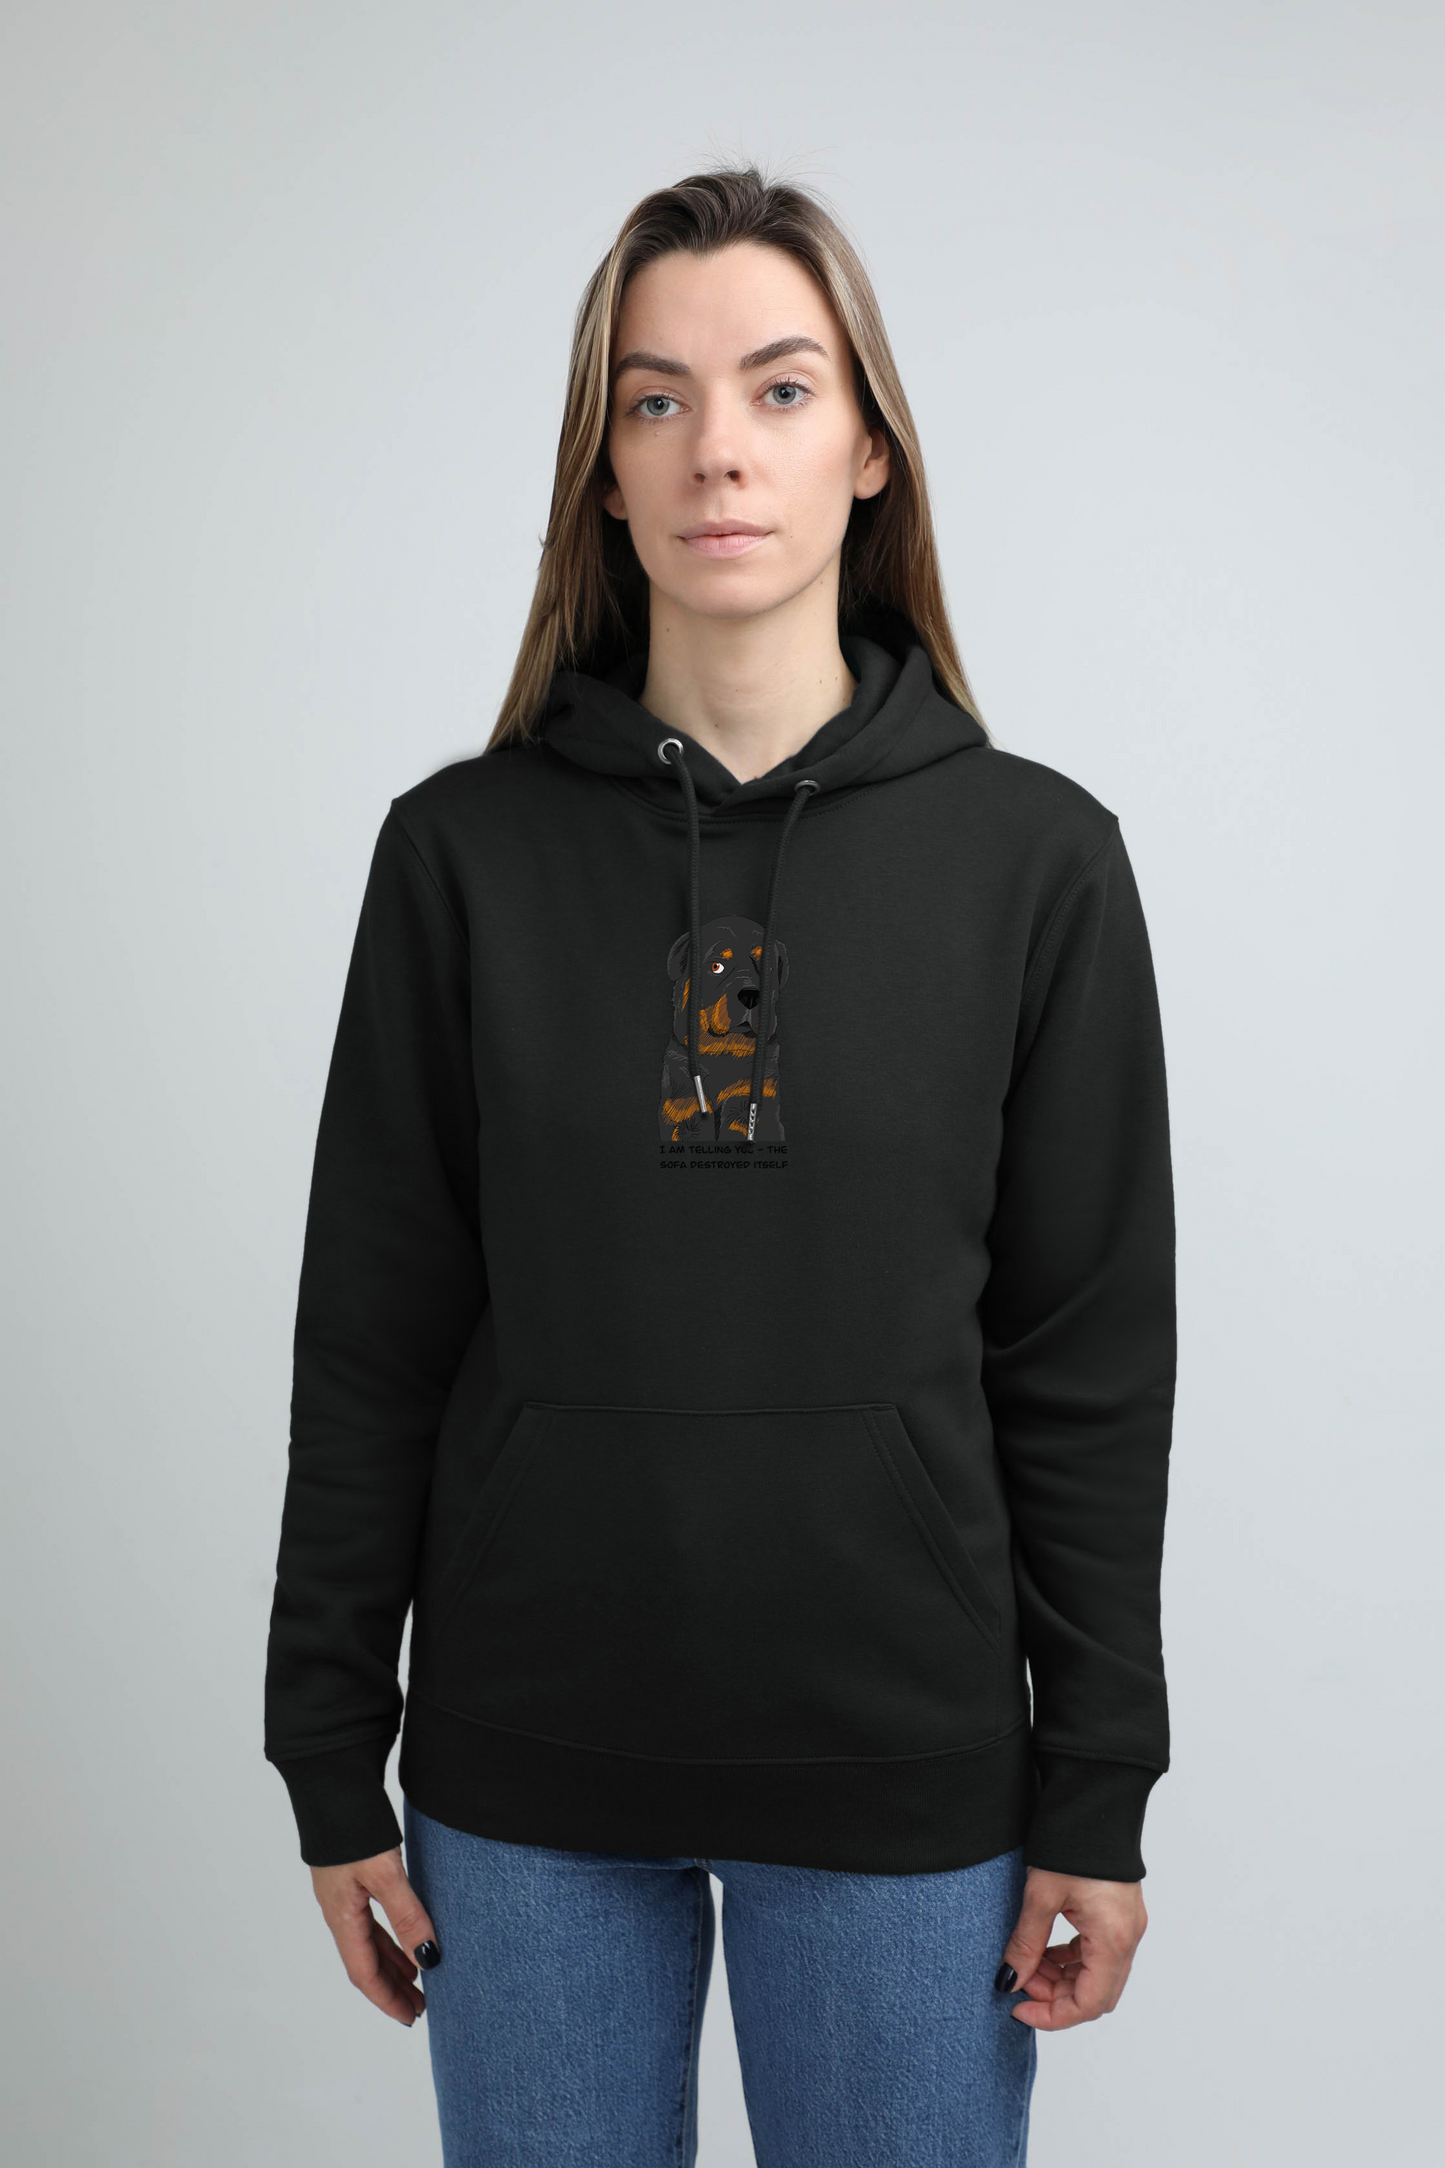 Sofa destroyer dog | Hoodie with dog. Regular fit | Unisex by My Wild Other